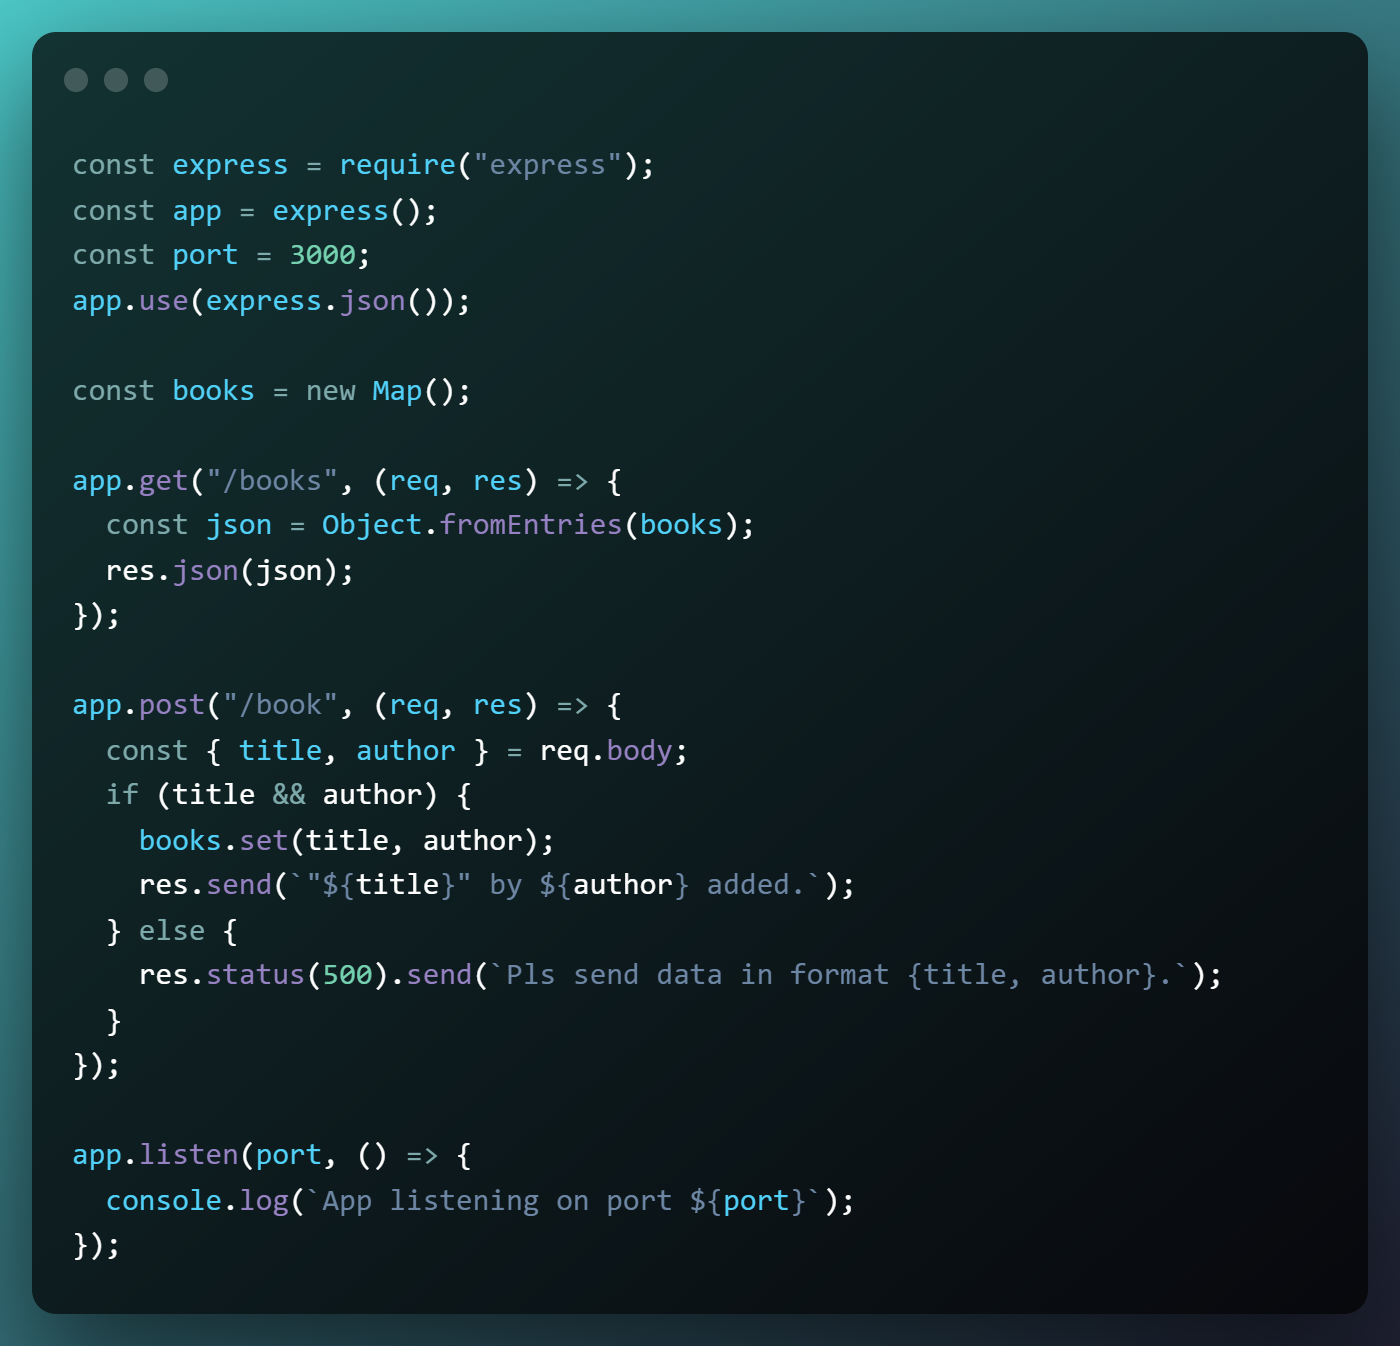 Room for improvement, but still the simplest API server that you can think of. Accepts POST requests for books in key-value pairs like { “title”: “Gaunt's Ghosts”, “author”: “Dan Abnett” }, stores it in an in-memory ES6 Map, and sends back the entire thing on a GET request.